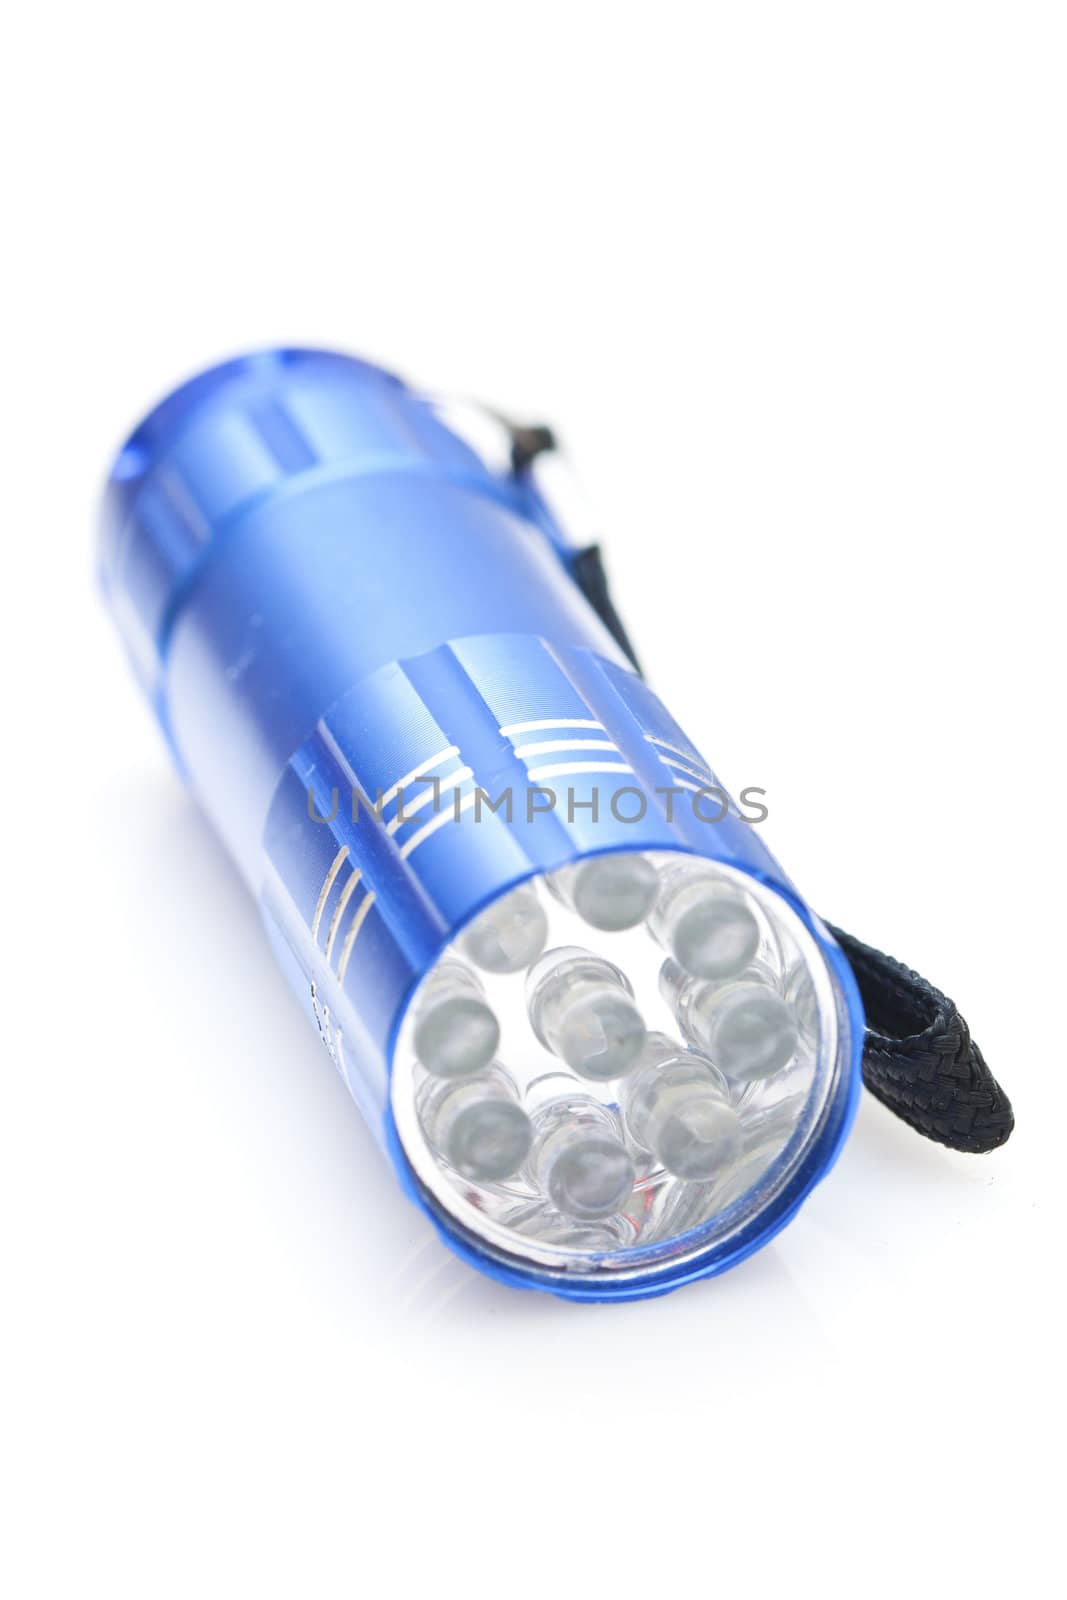 Blue torch on white background